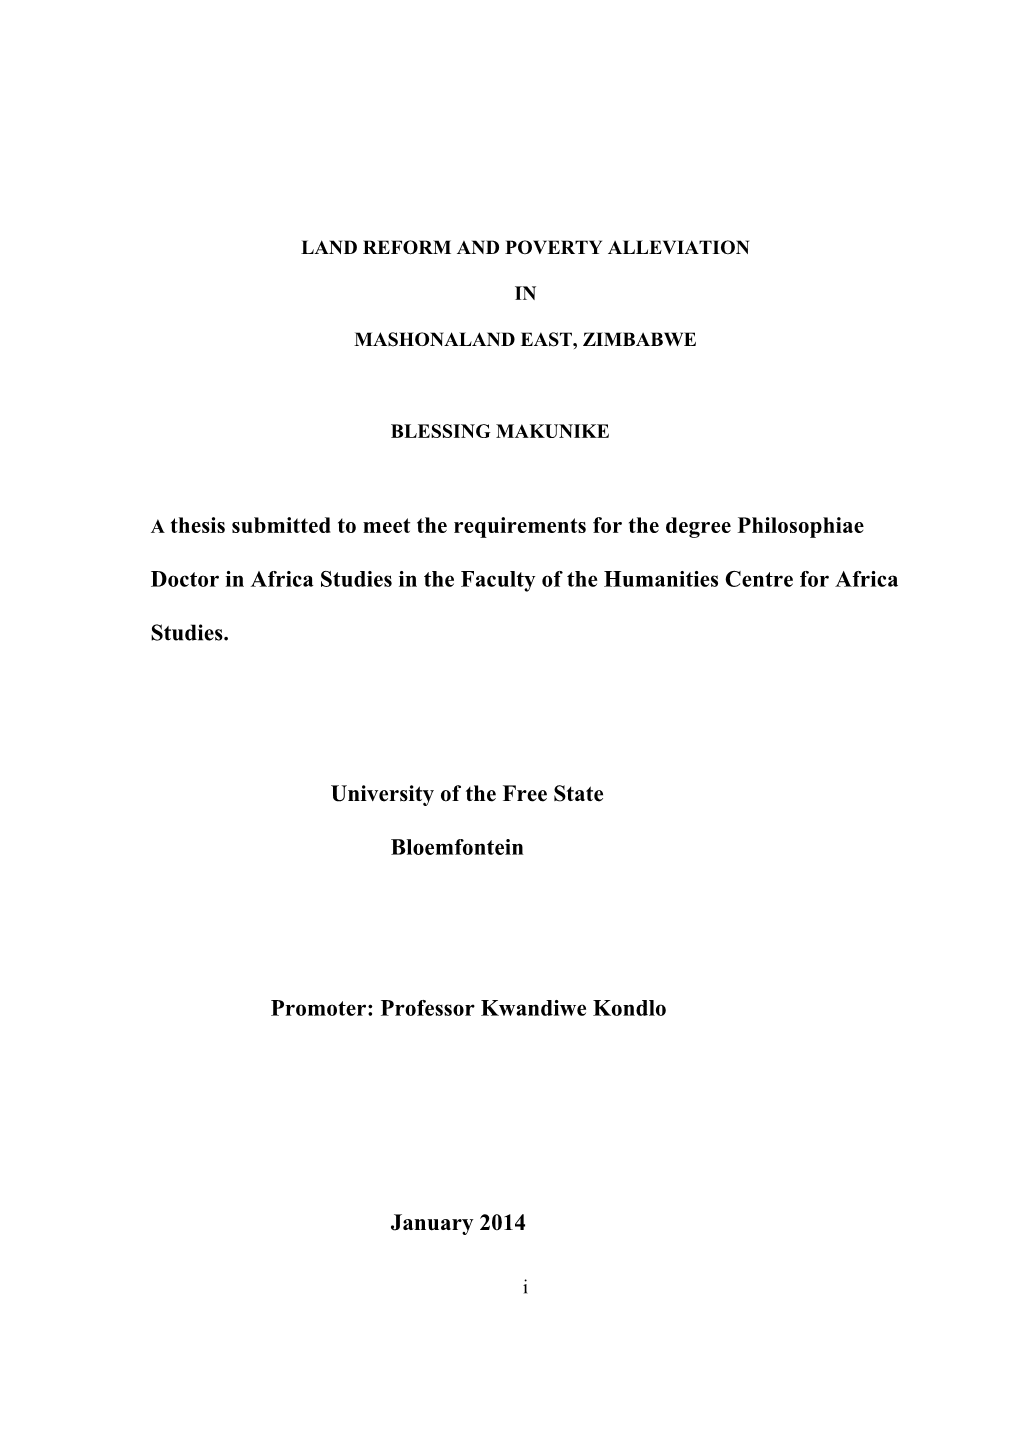 A Thesis Submitted to Meet the Requirements for the Degree Philosophiae